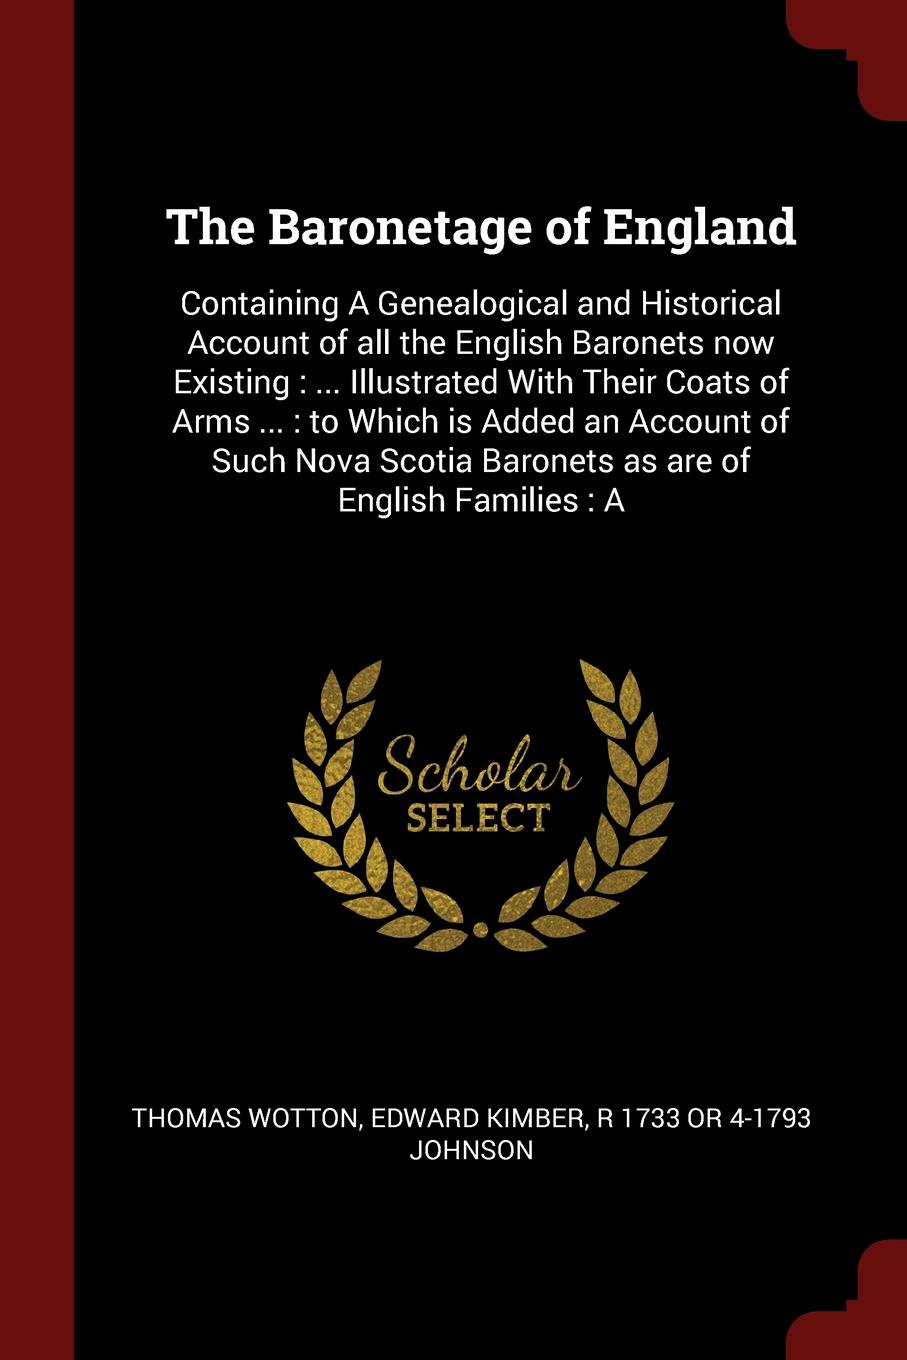 The Baronetage of England. Containing A Genealogical and Historical Account of all the English Baronets now Existing : ... Illustrated With Their Coats of Arms ... : to Which is Added an Account of Such Nova Scotia Baronets as are of English Famil...